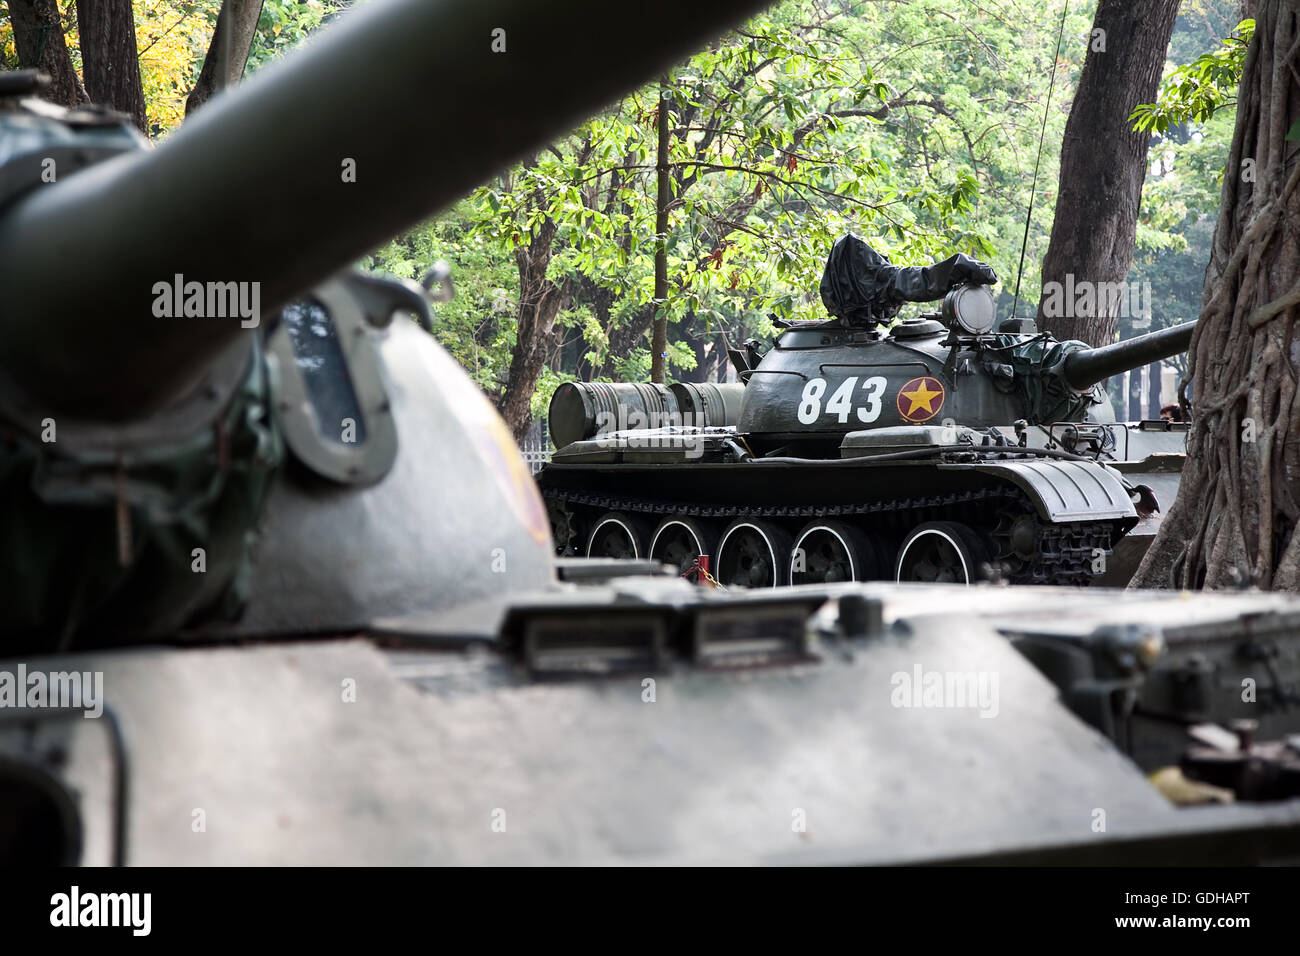 Replica of the PAVN T-55 tank, numbered 843 and 390, who stormed the gates of the Presidential Palace on April 30, 1975 Stock Photo